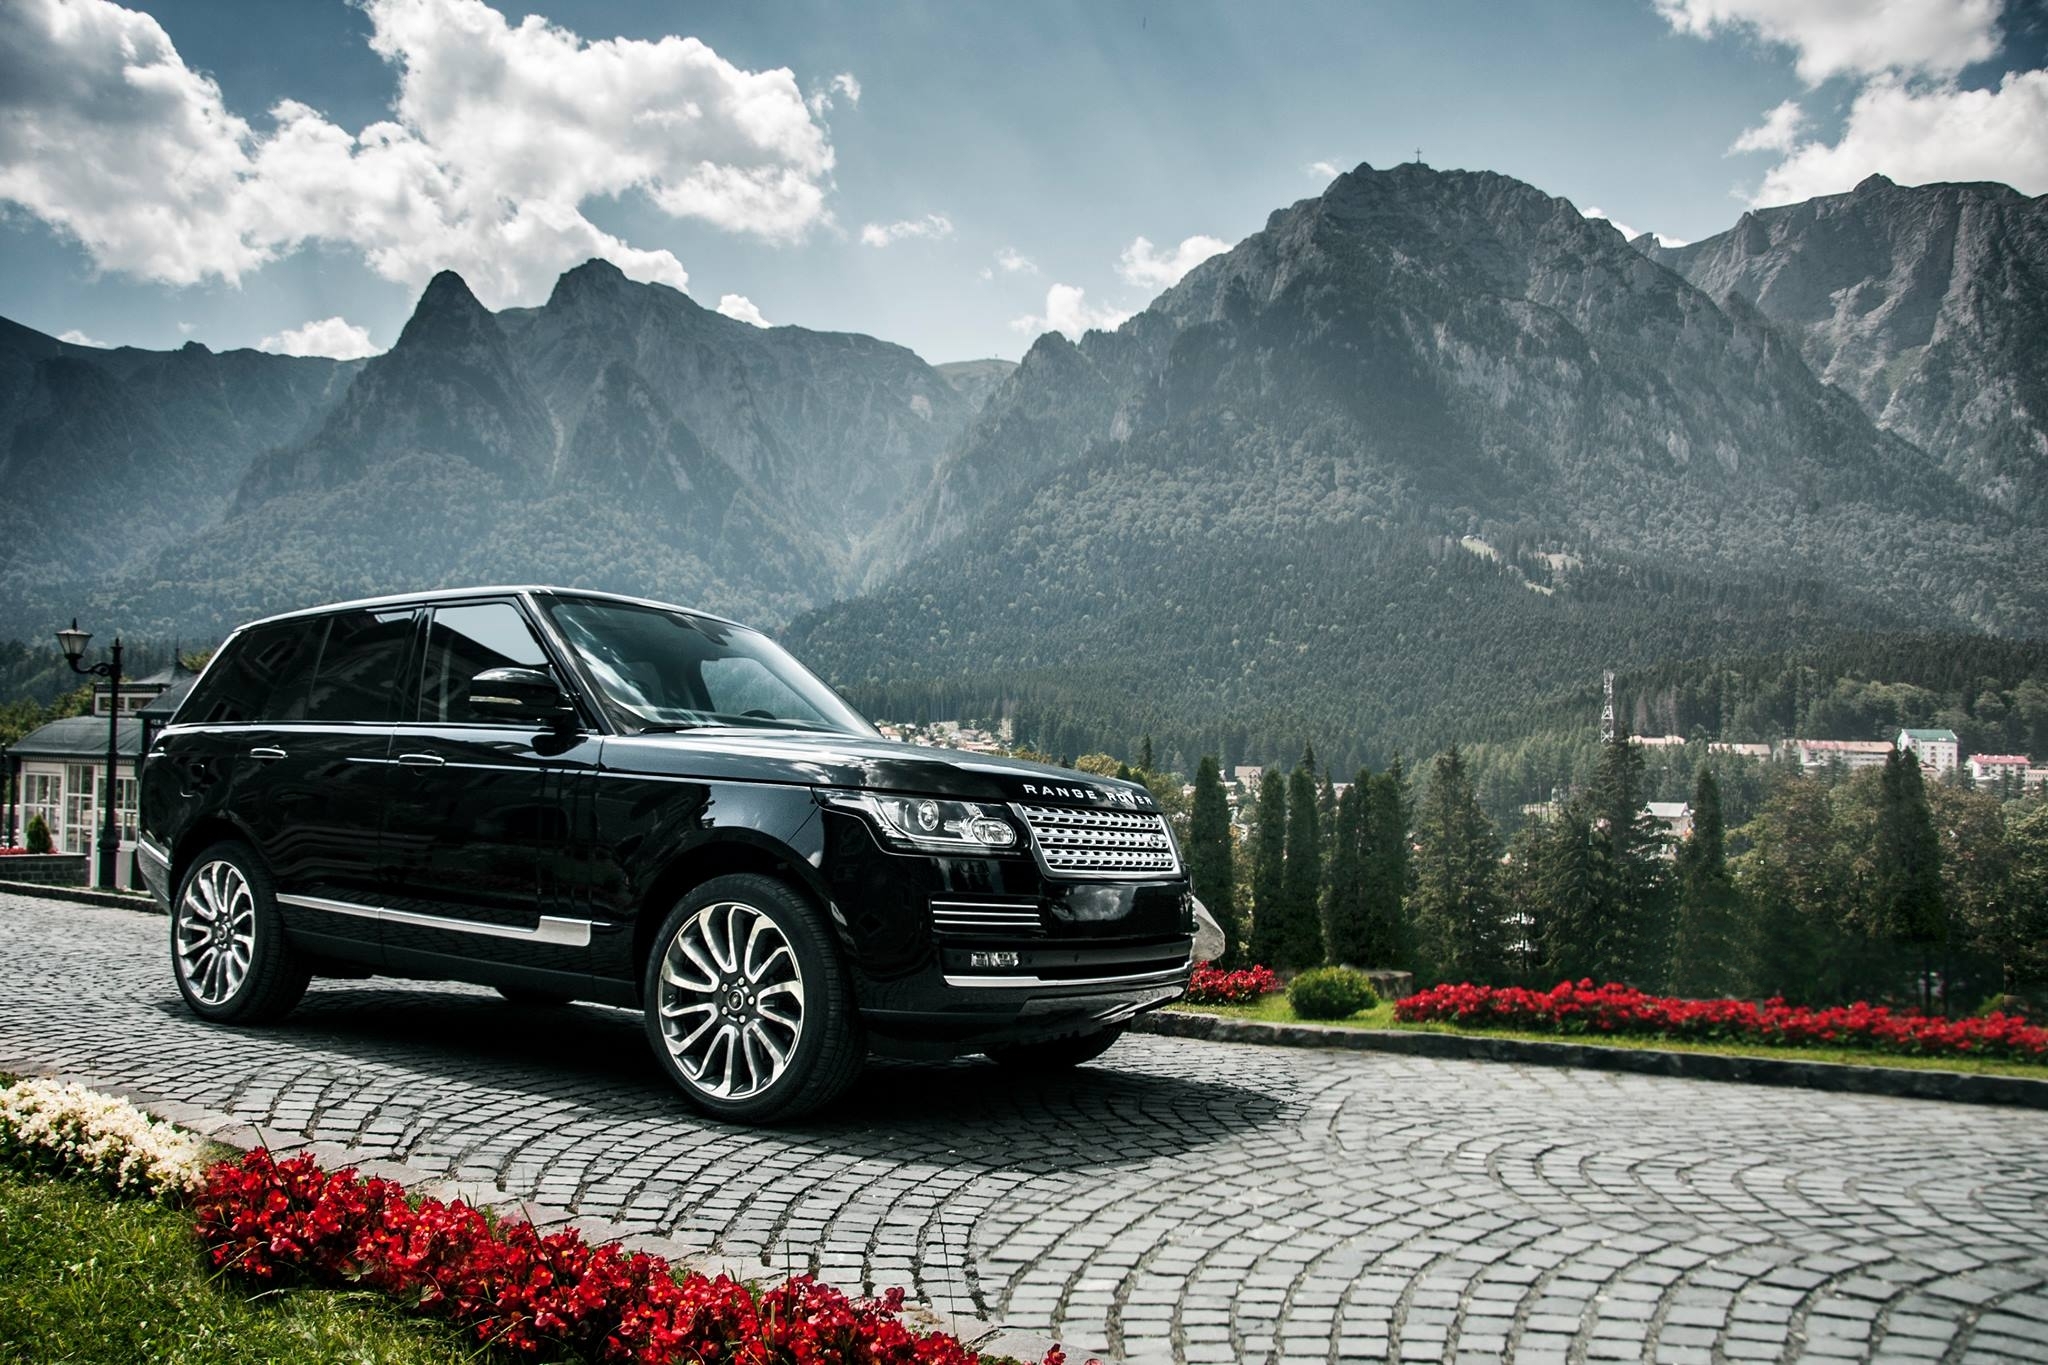 range rover, black, cars, mountains, side view